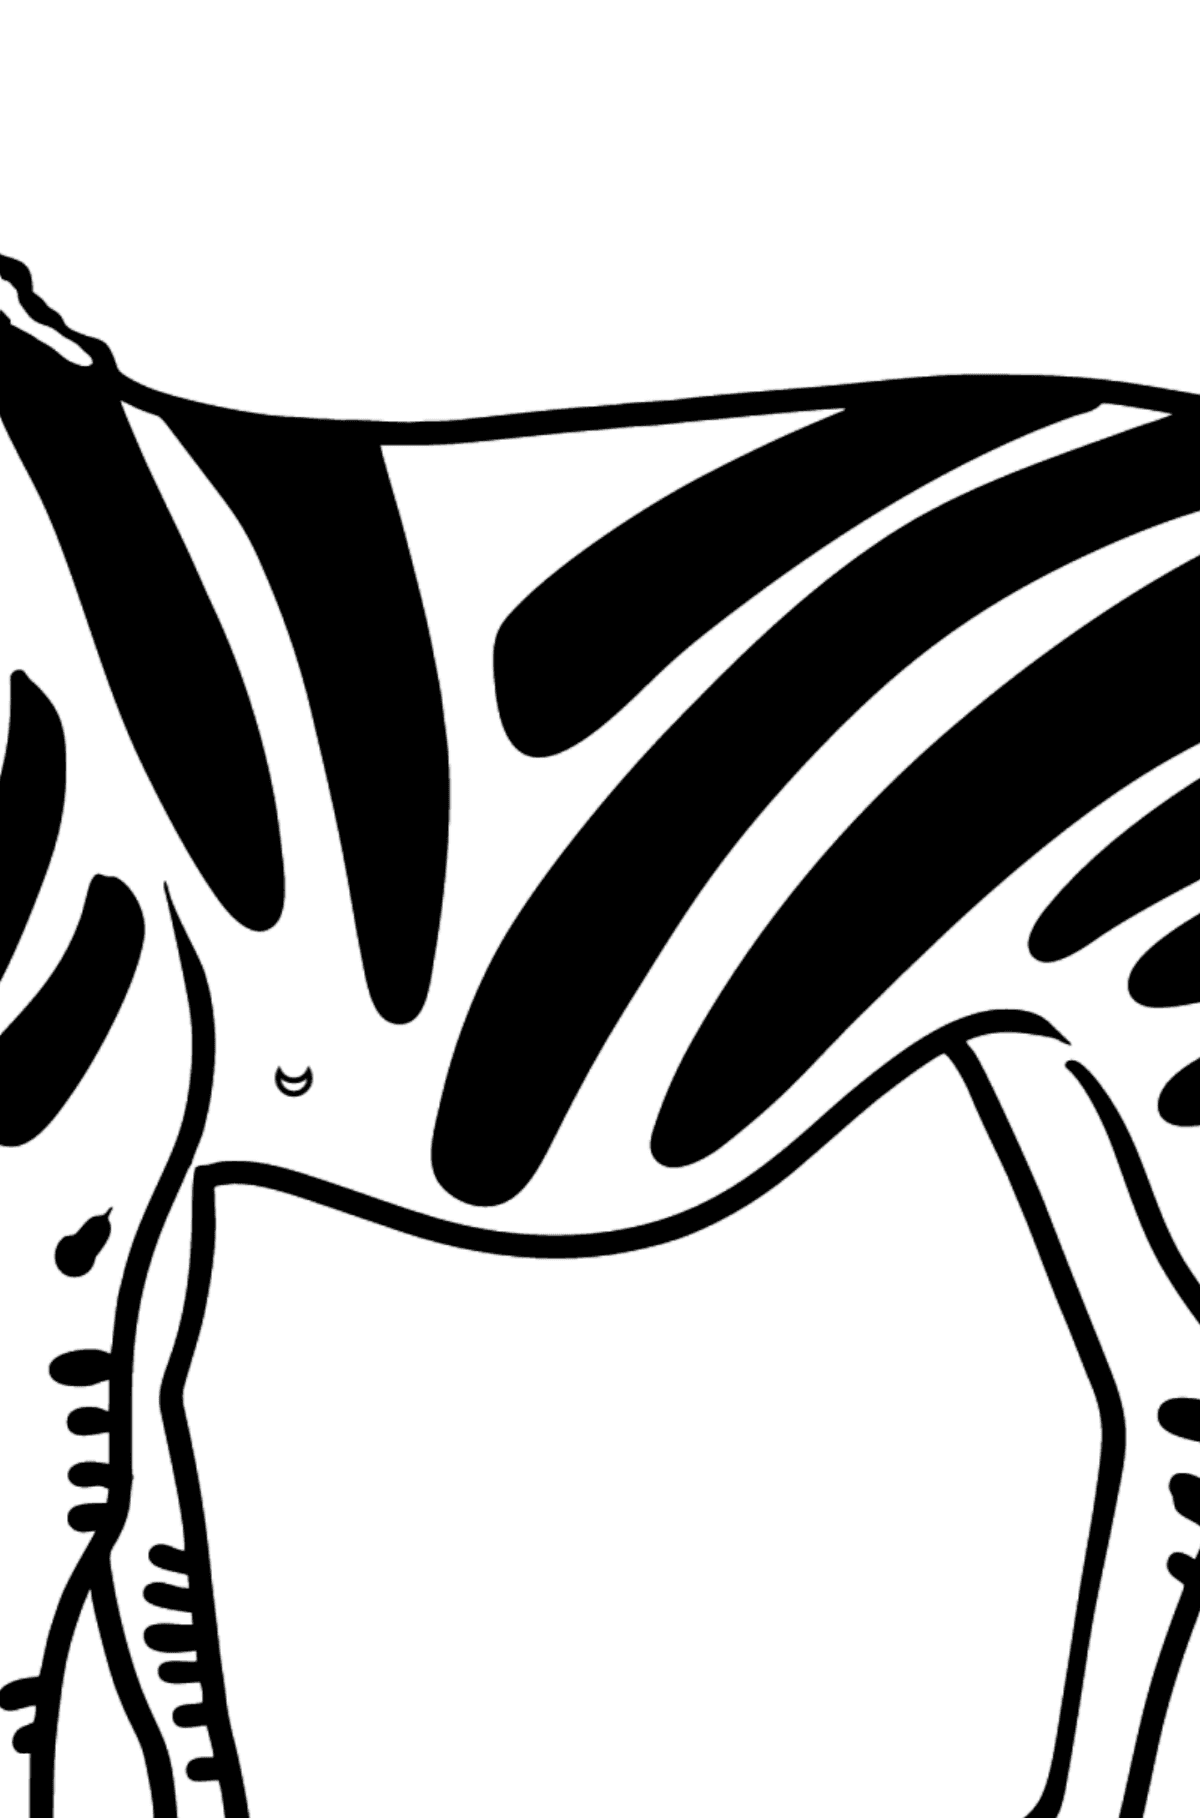 Zebra coloring page - Coloring by Symbols and Geometric Shapes for Kids